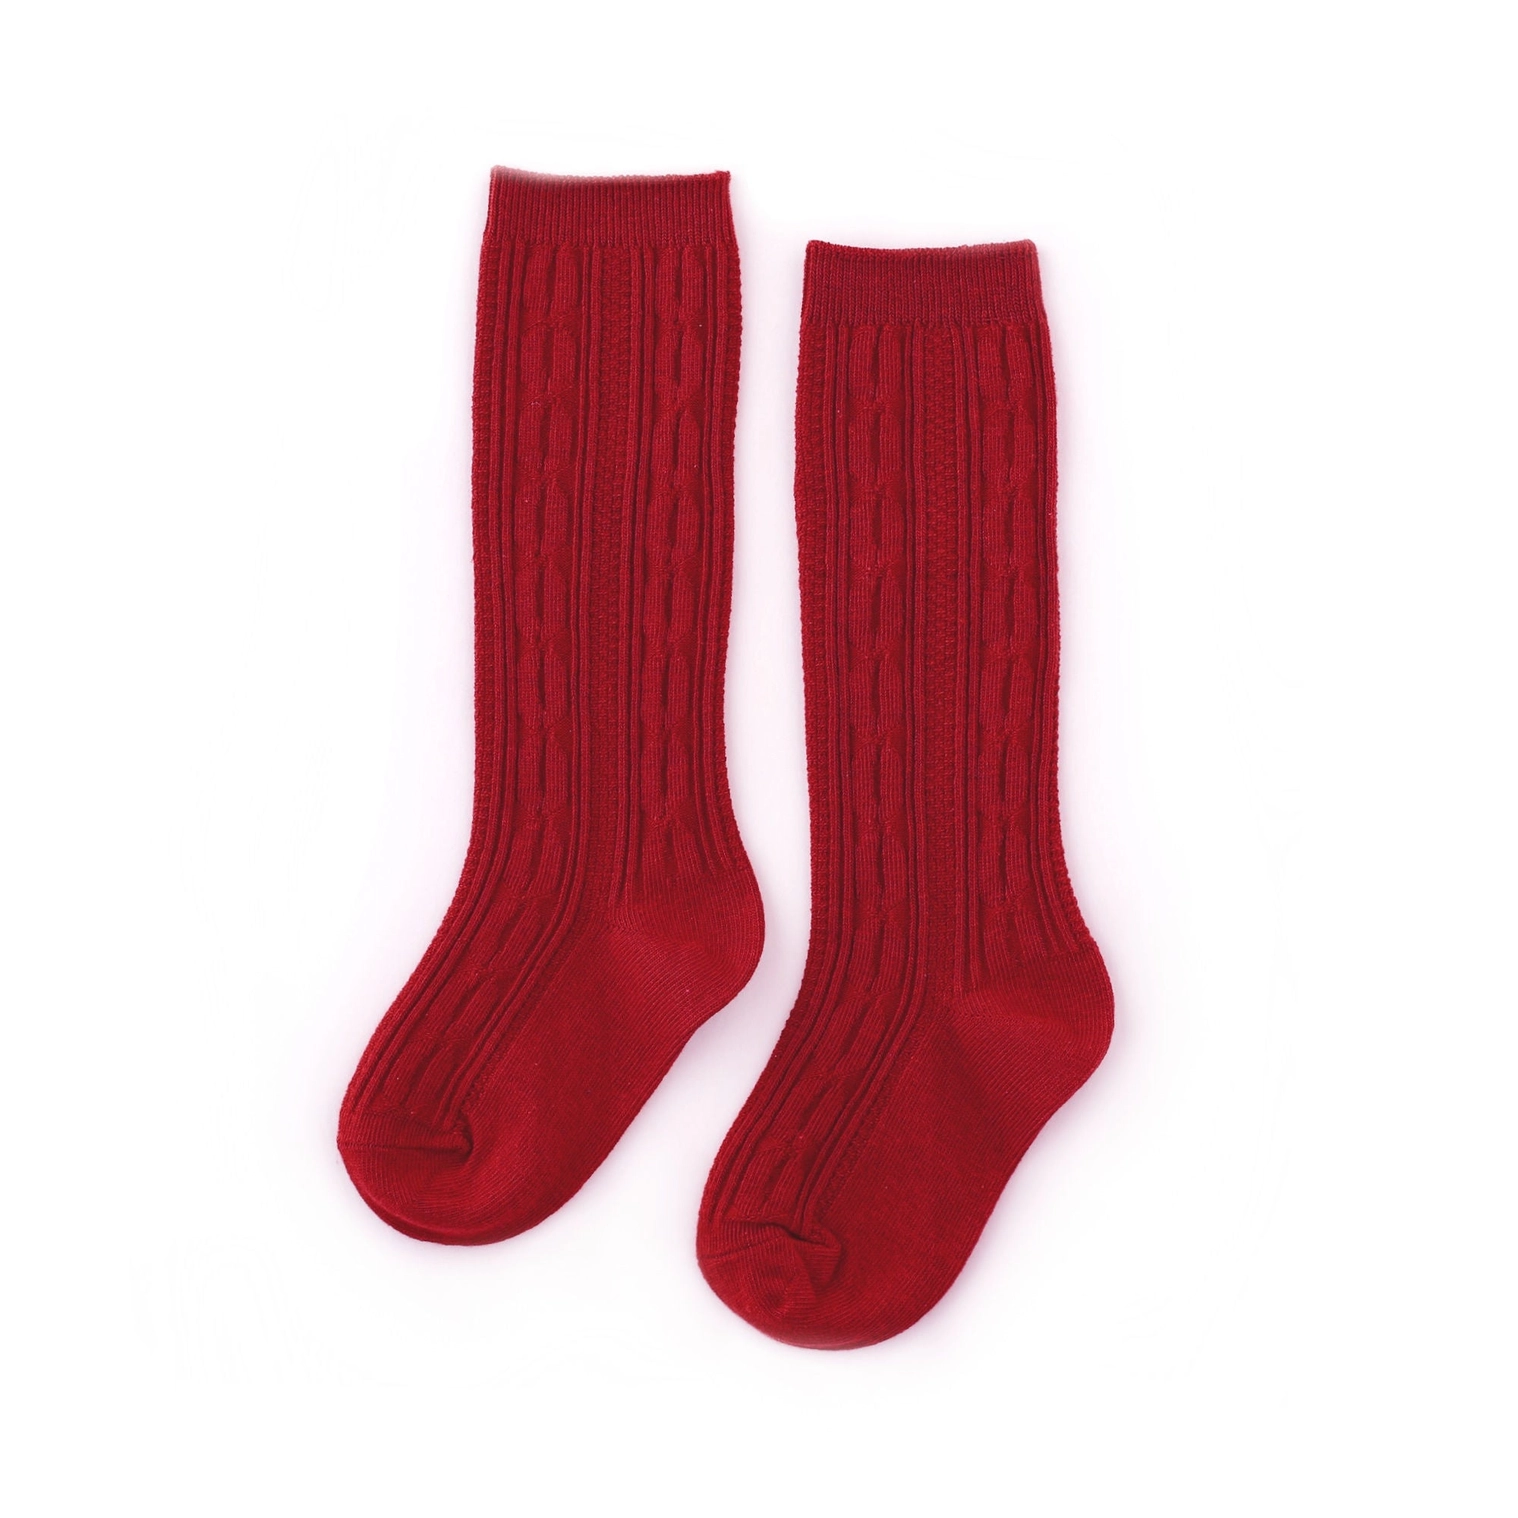 Cherry Cable Knit Knee High Socks - Little Stocking Co.